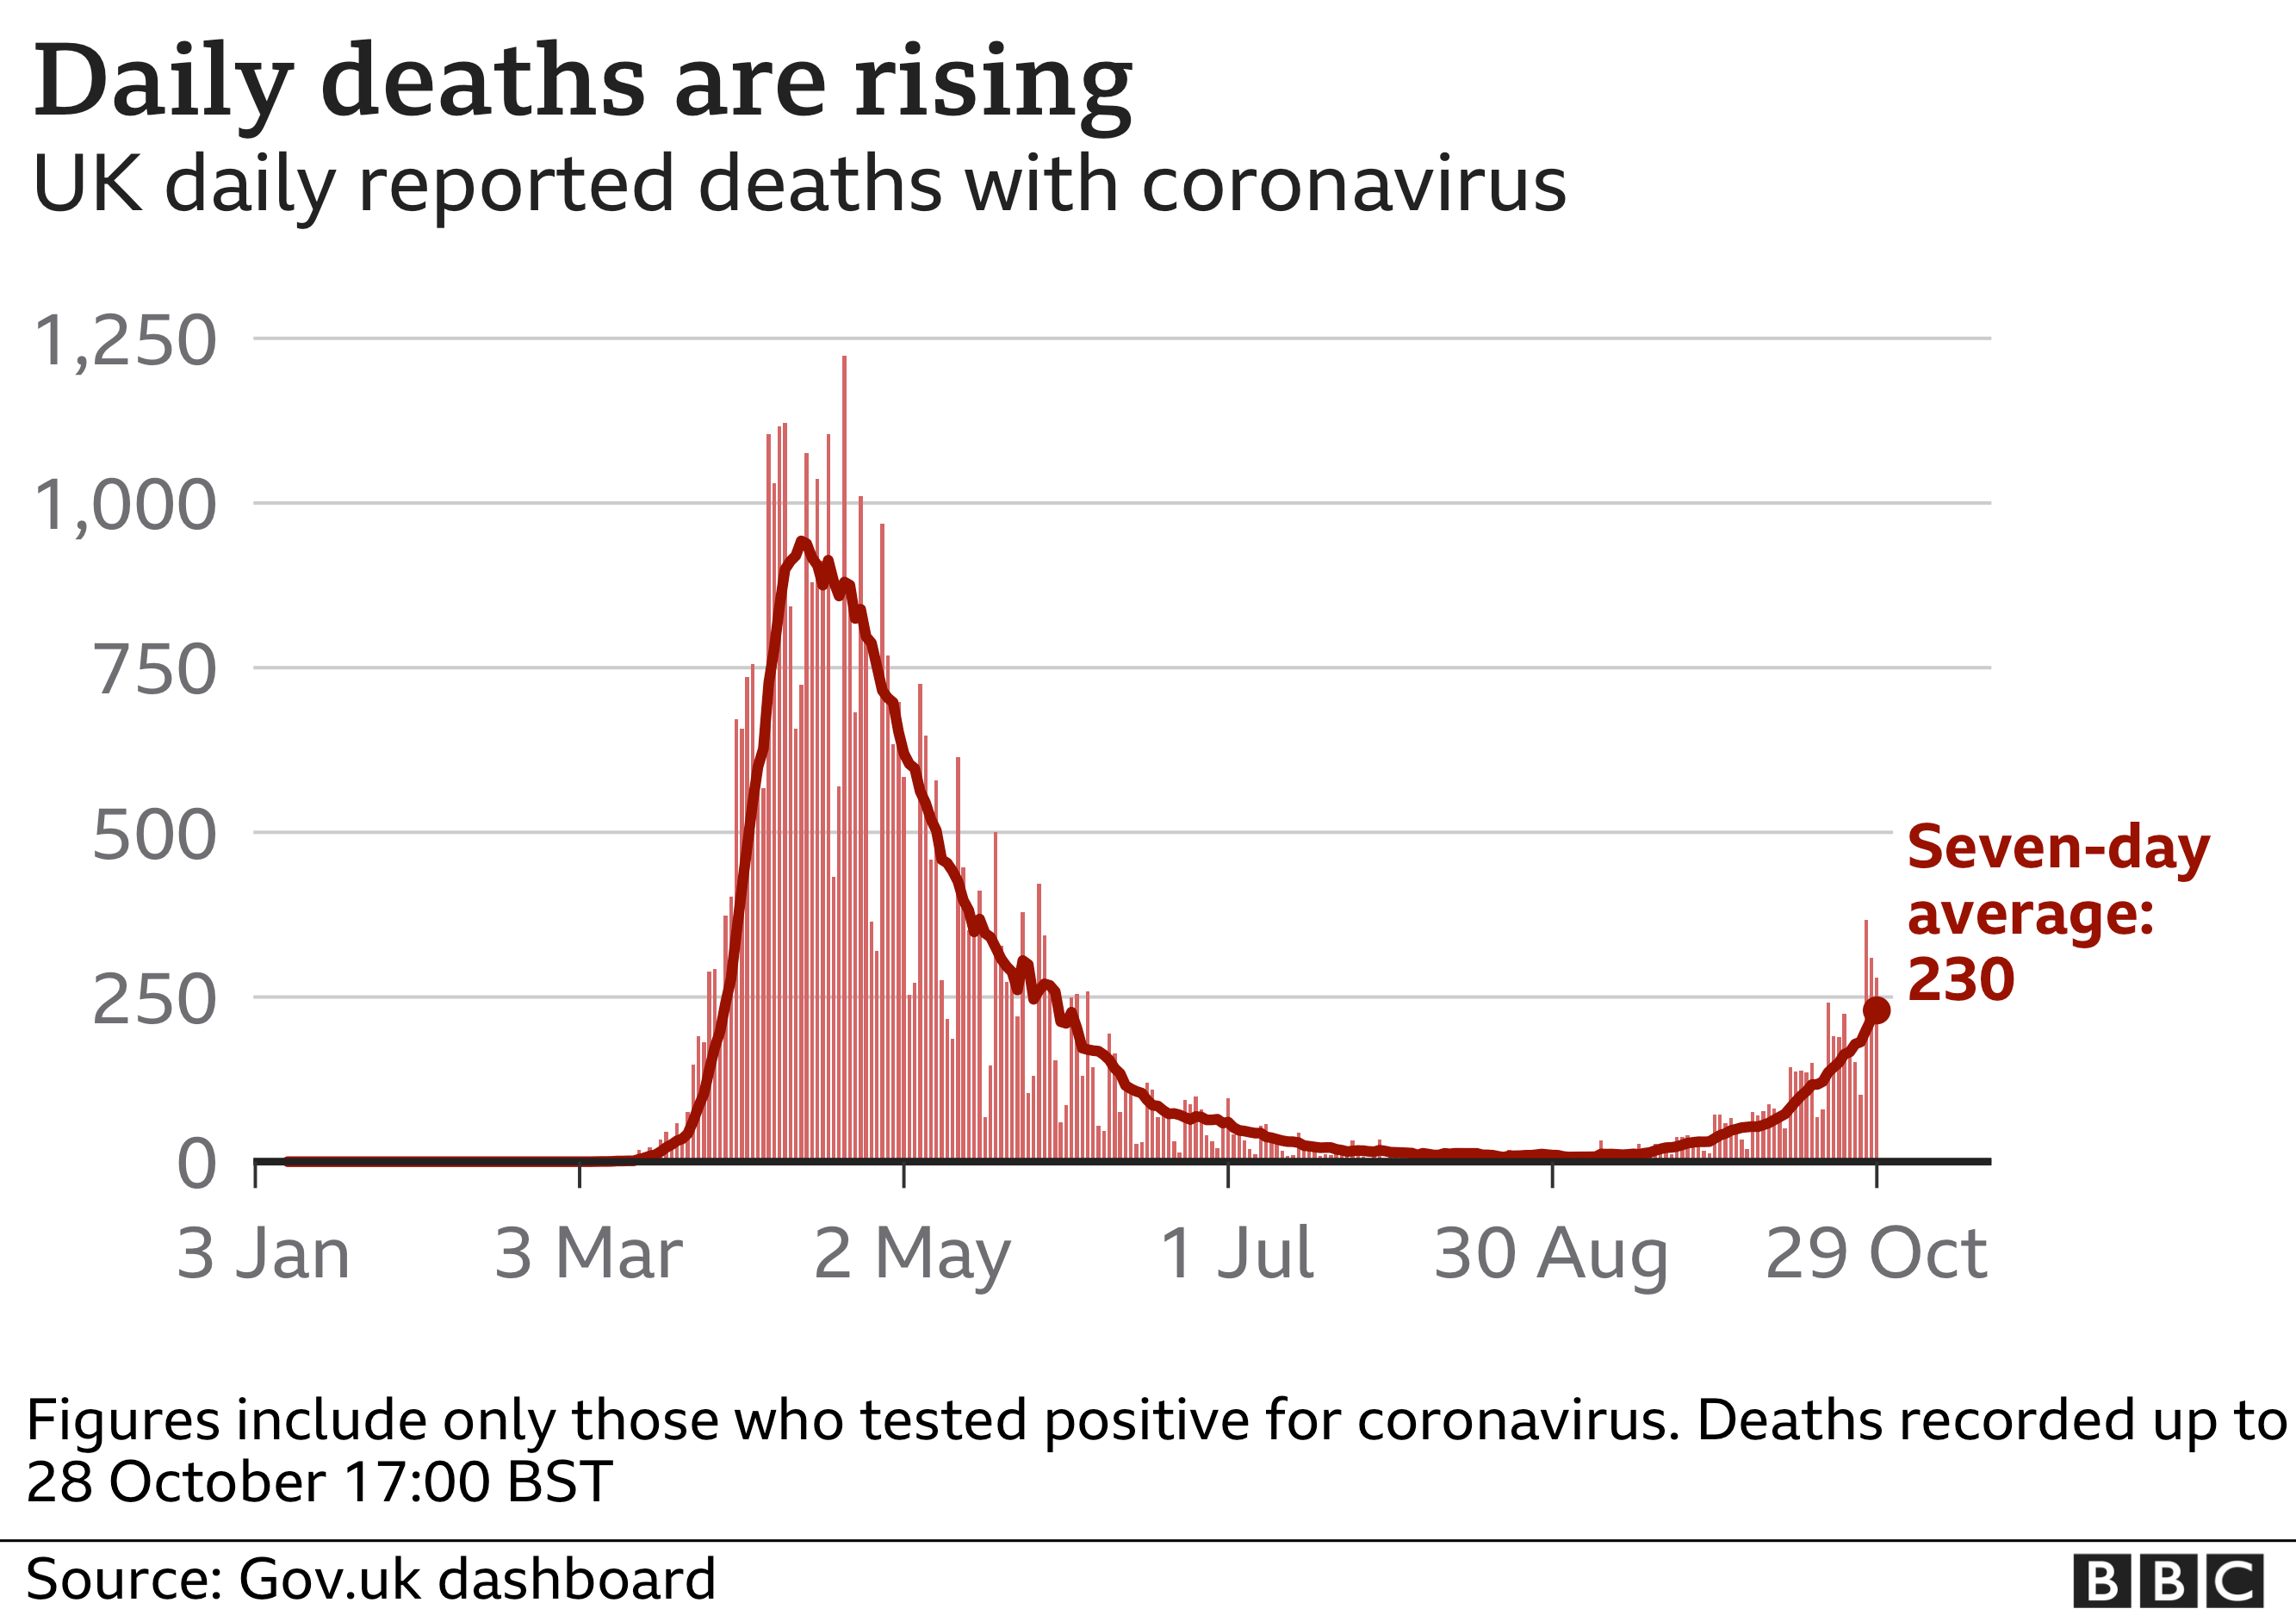 Chart shows daily deaths are continuing to rise